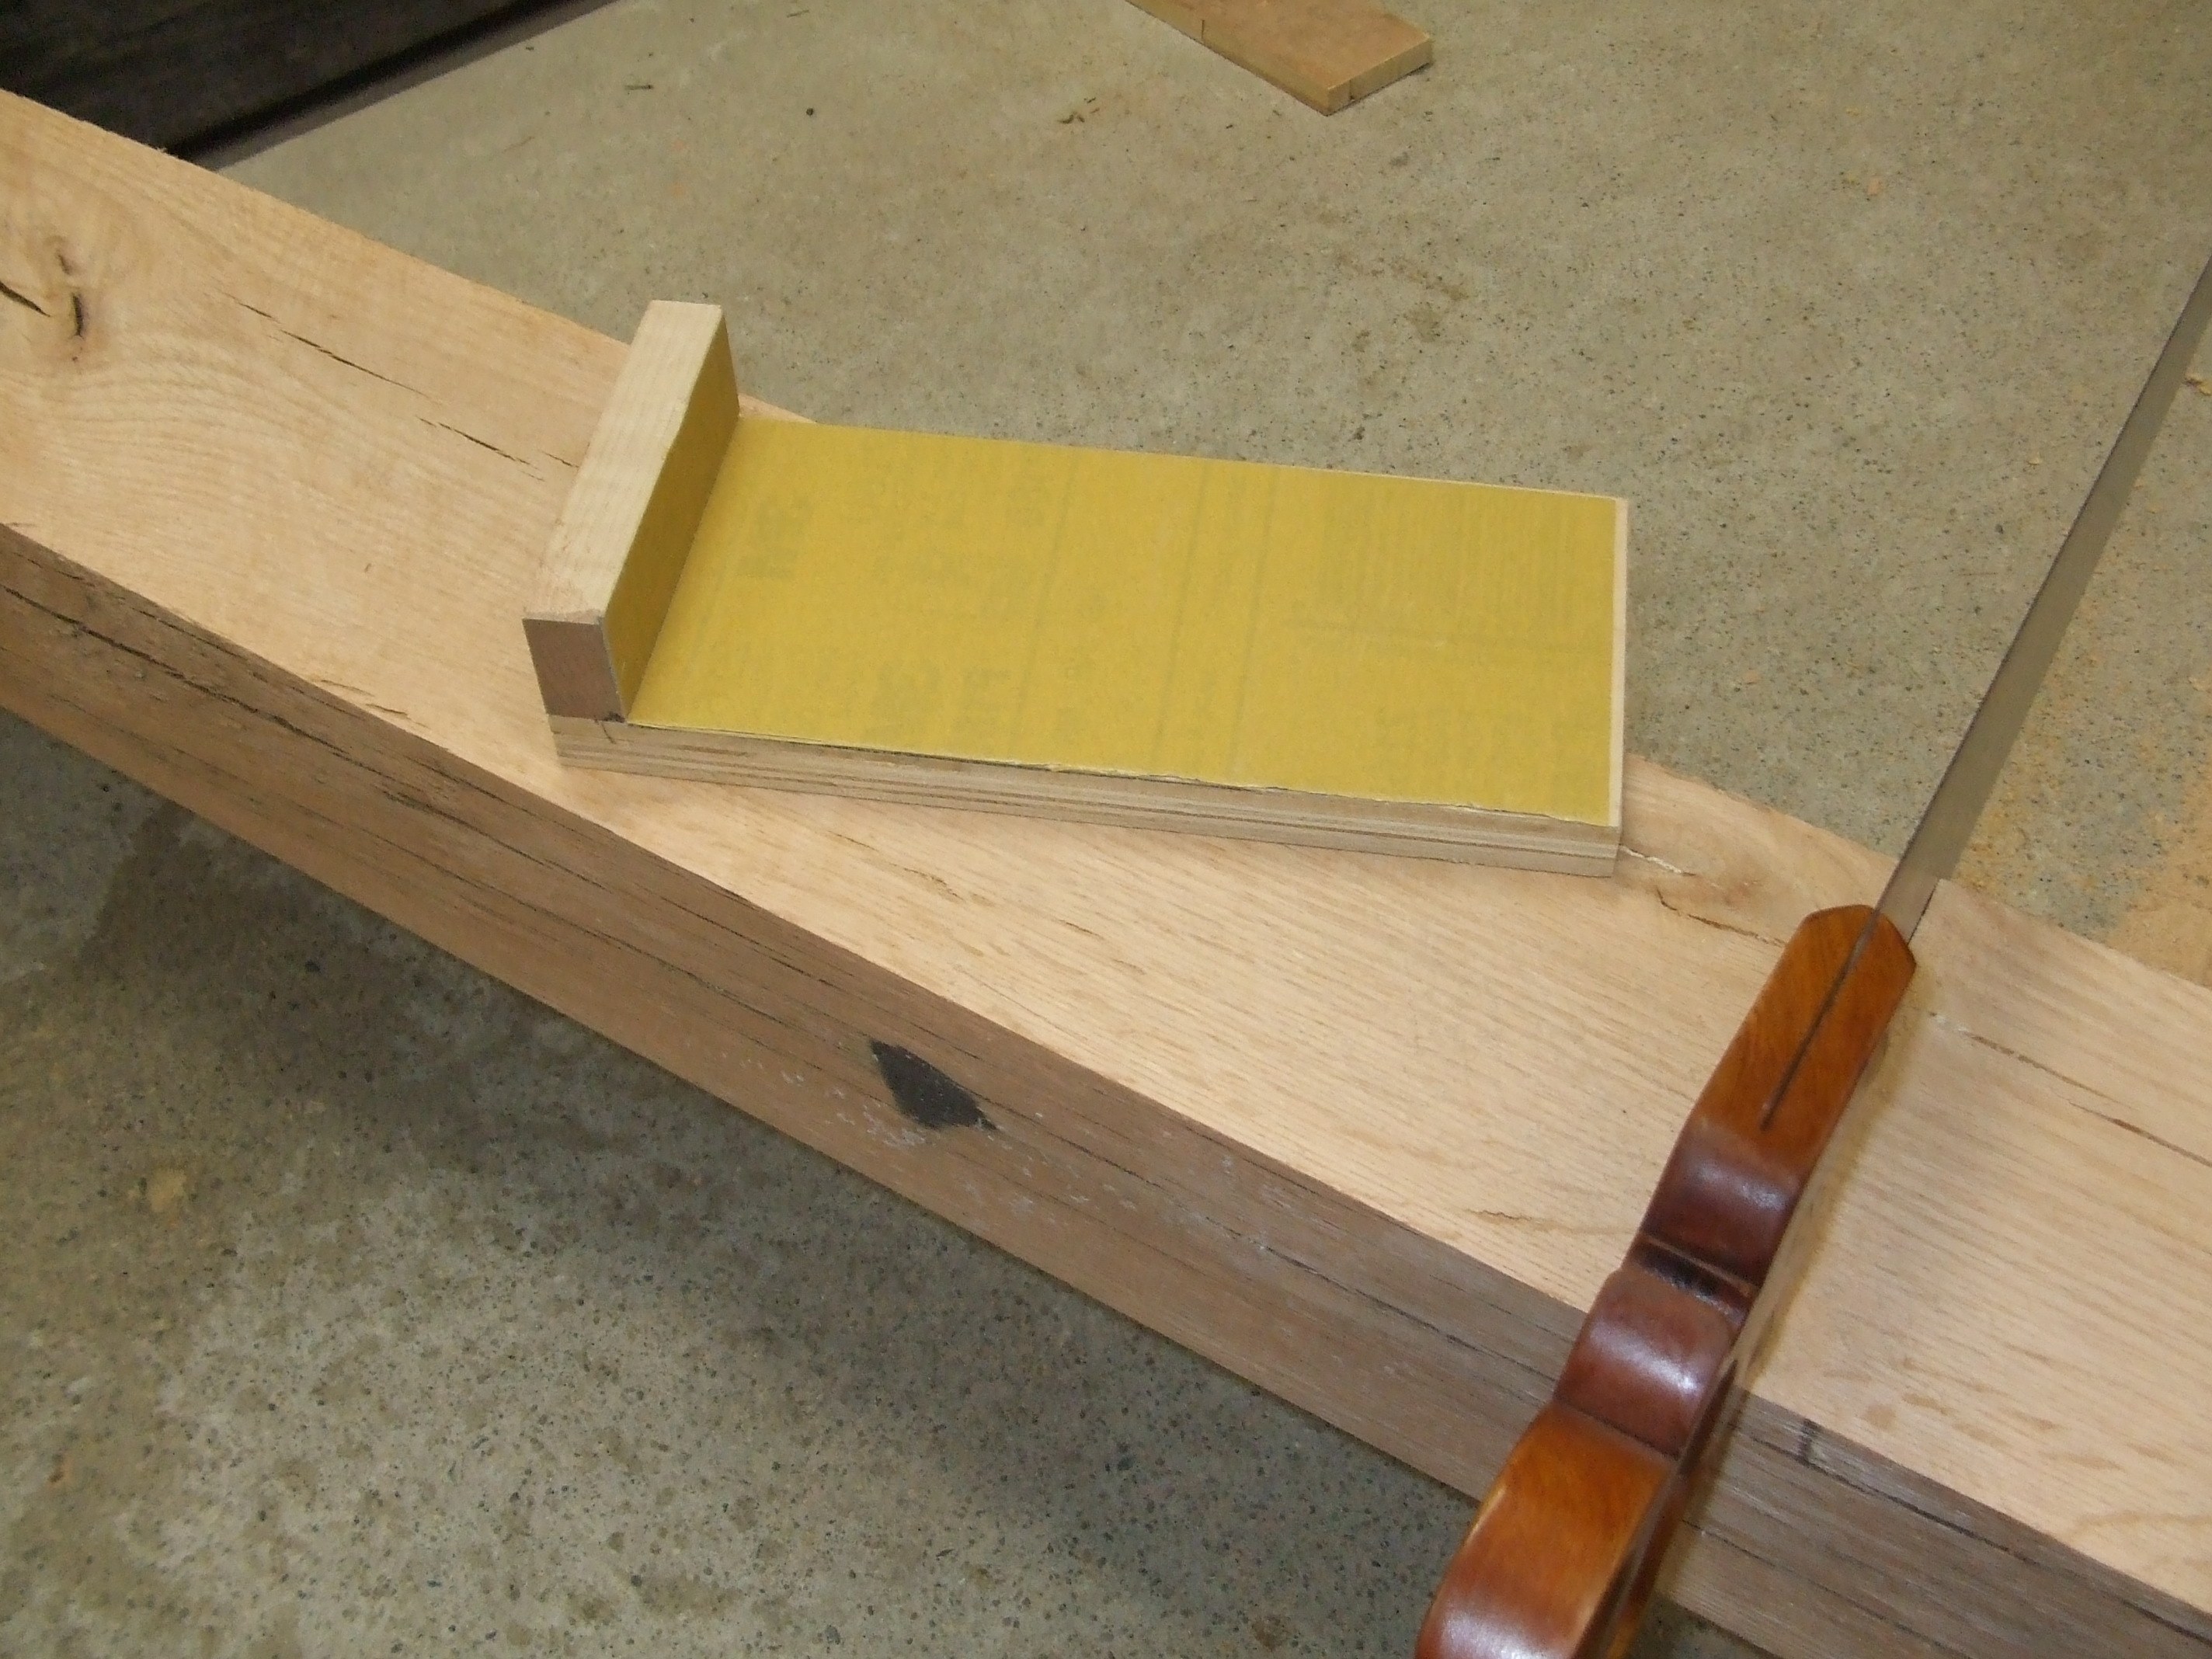 Woodworking Bench Hook Plans woodworking bench joints ...